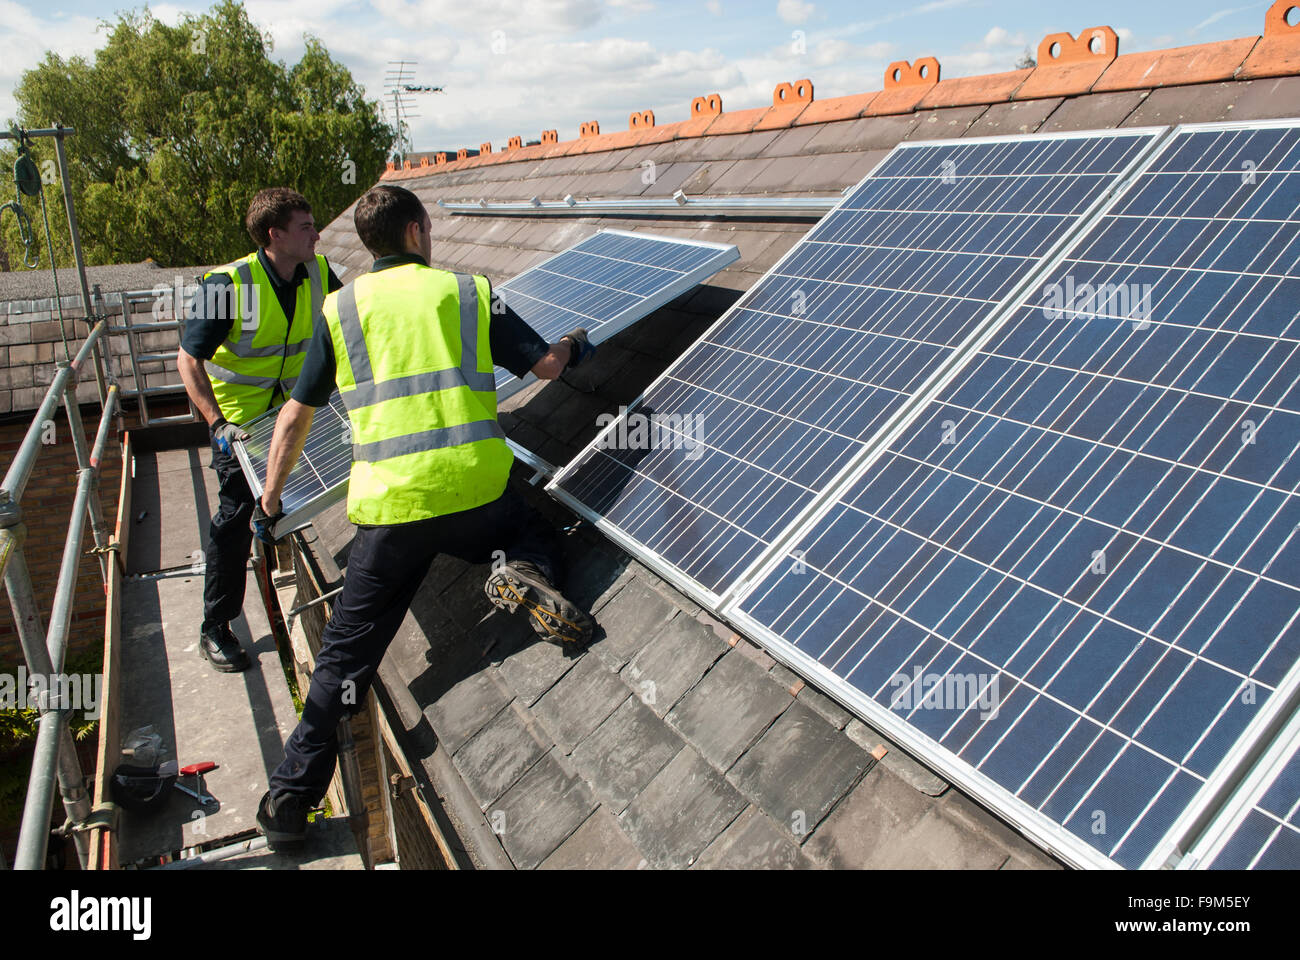 Workers install photovoltaic solar panels on the slate roof of a Stock Photo 92027123 Alamy